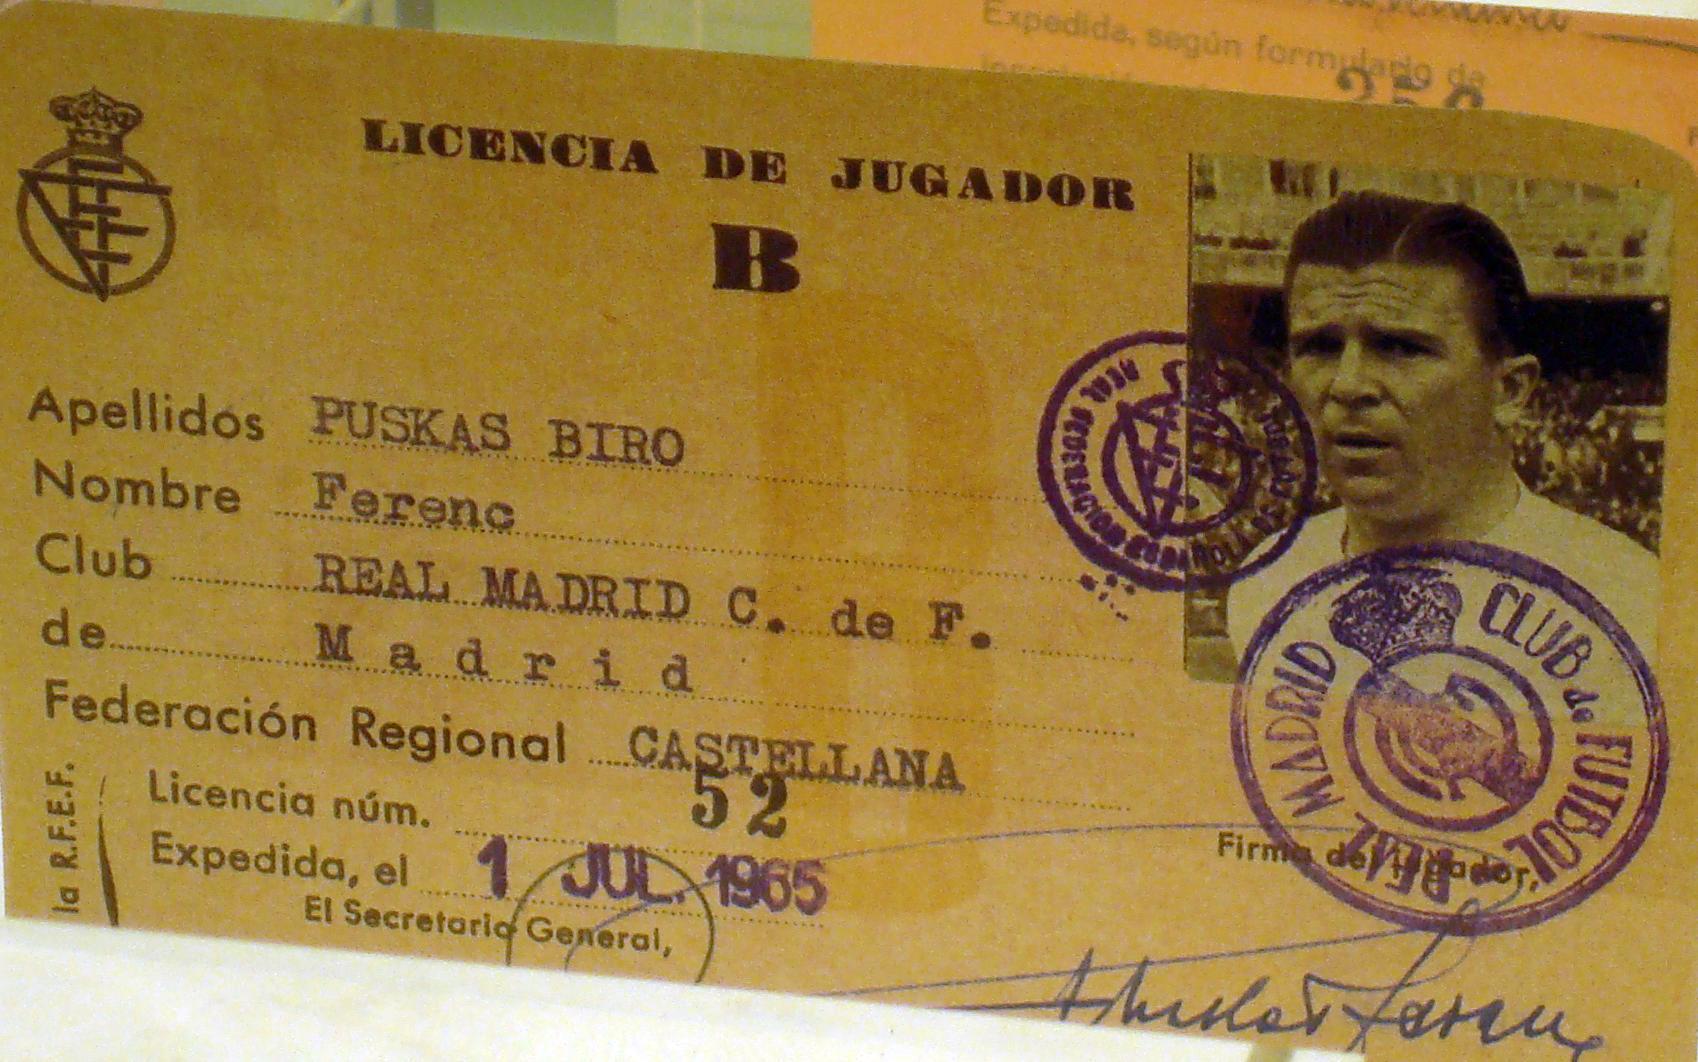 Puskás's player licence, showing his mother's maiden name Biró as a second surname in accordance with Spanish naming customs